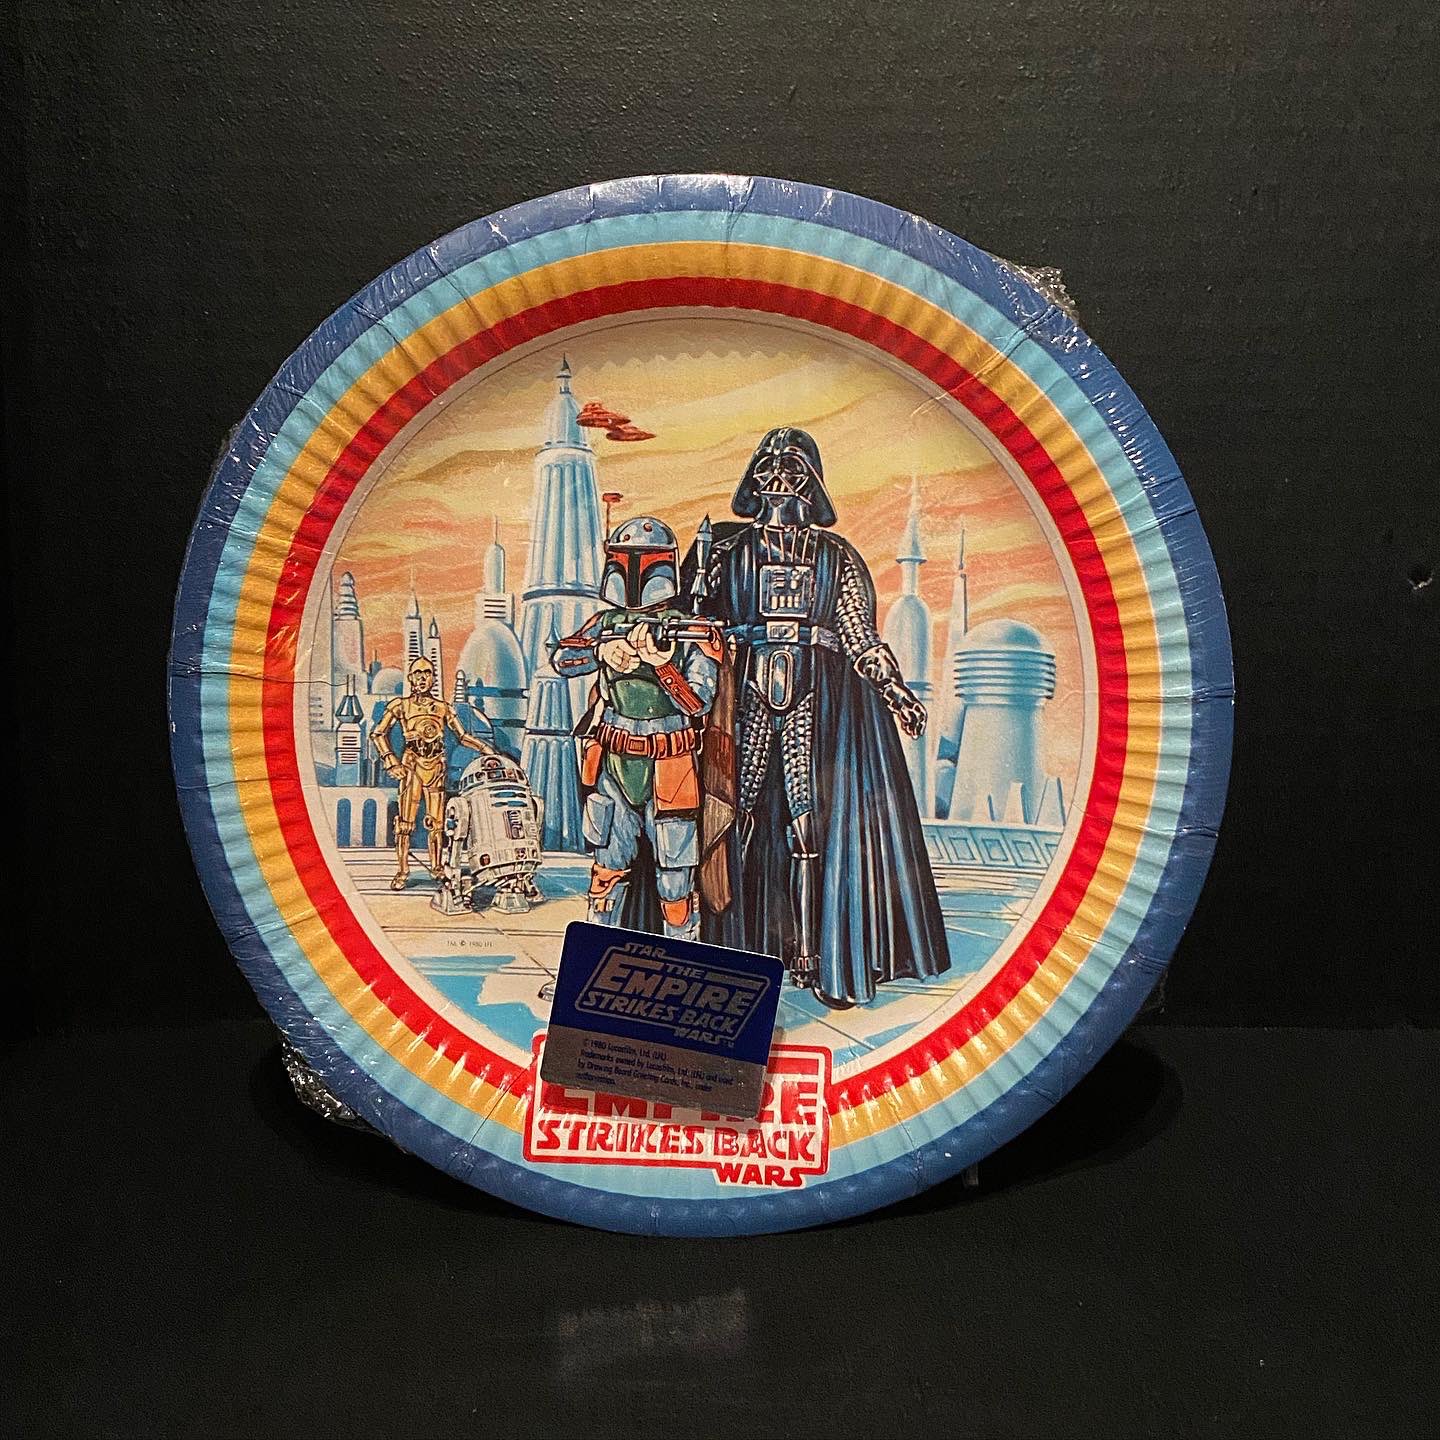 Robbie on X: New Acquisition: Designware paper plates. #collection  #collector #starwars #vintage #vintagestarwars #theempirestrikesback  #designware #plate #paperplates #party #darthvader #bobafett #c3po #r2d2  #chewbacca #cloudcity #bespin